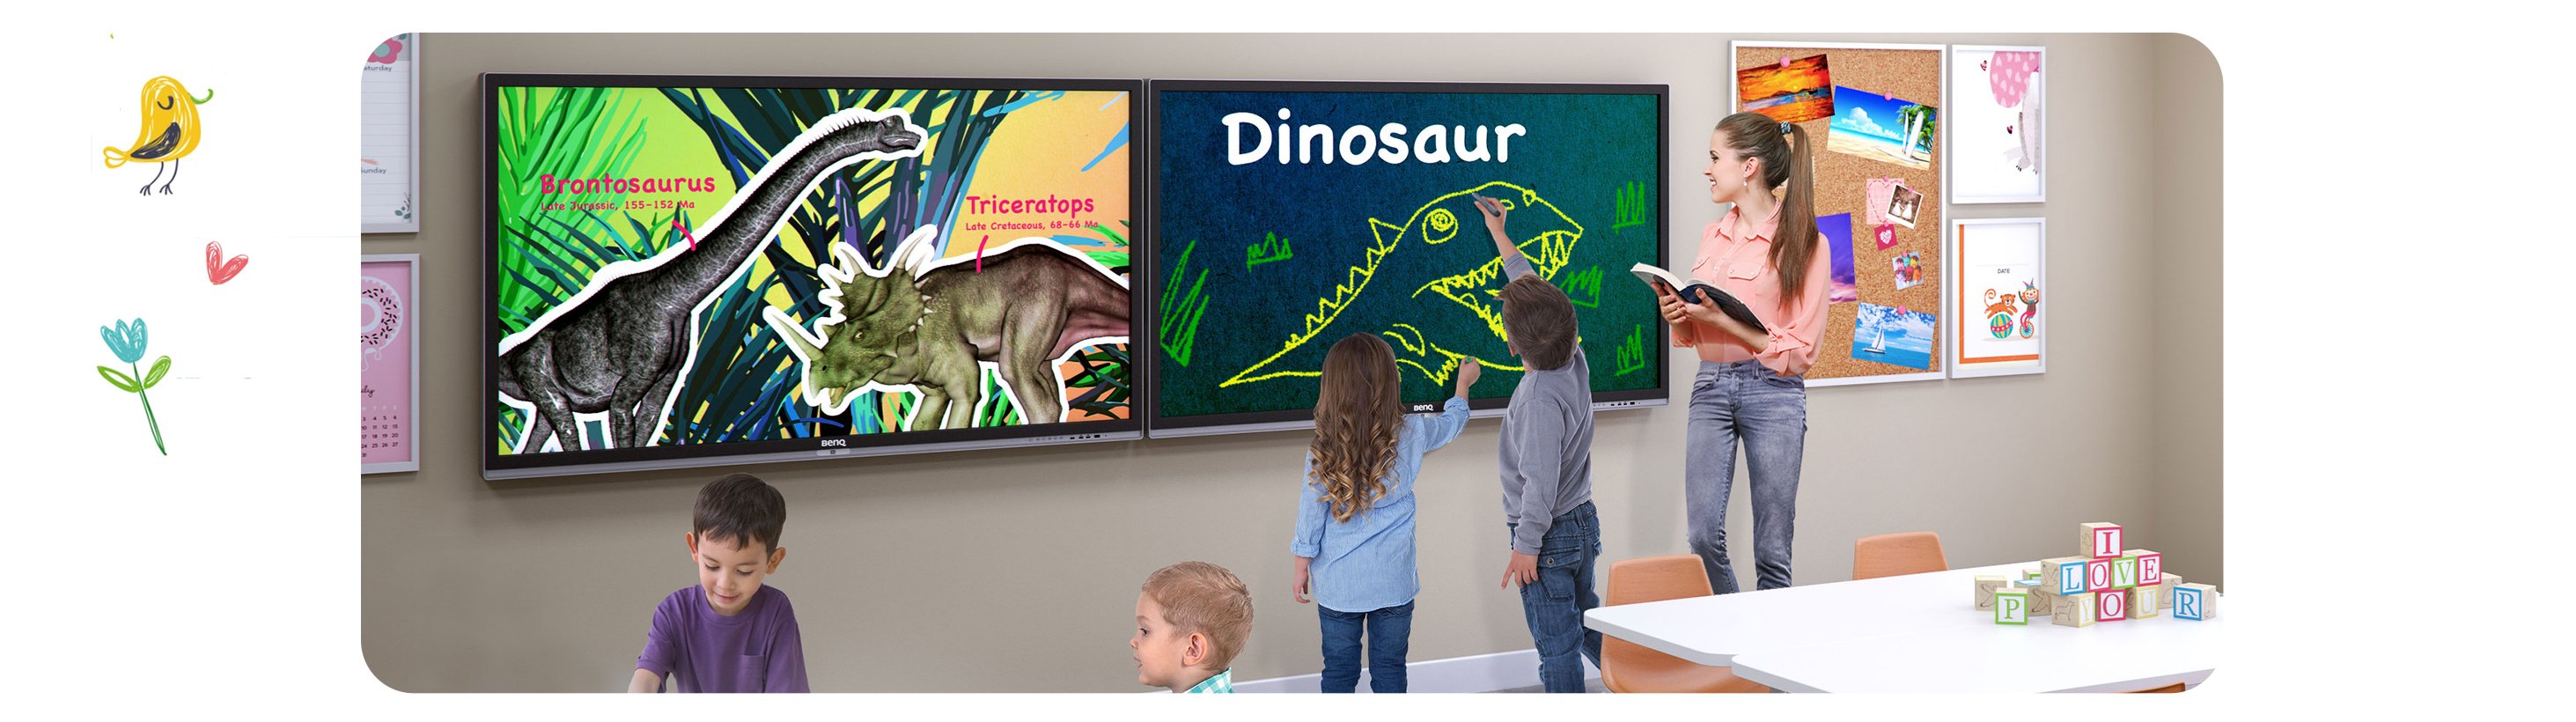 Learning through new technology with BenQ interactive displays